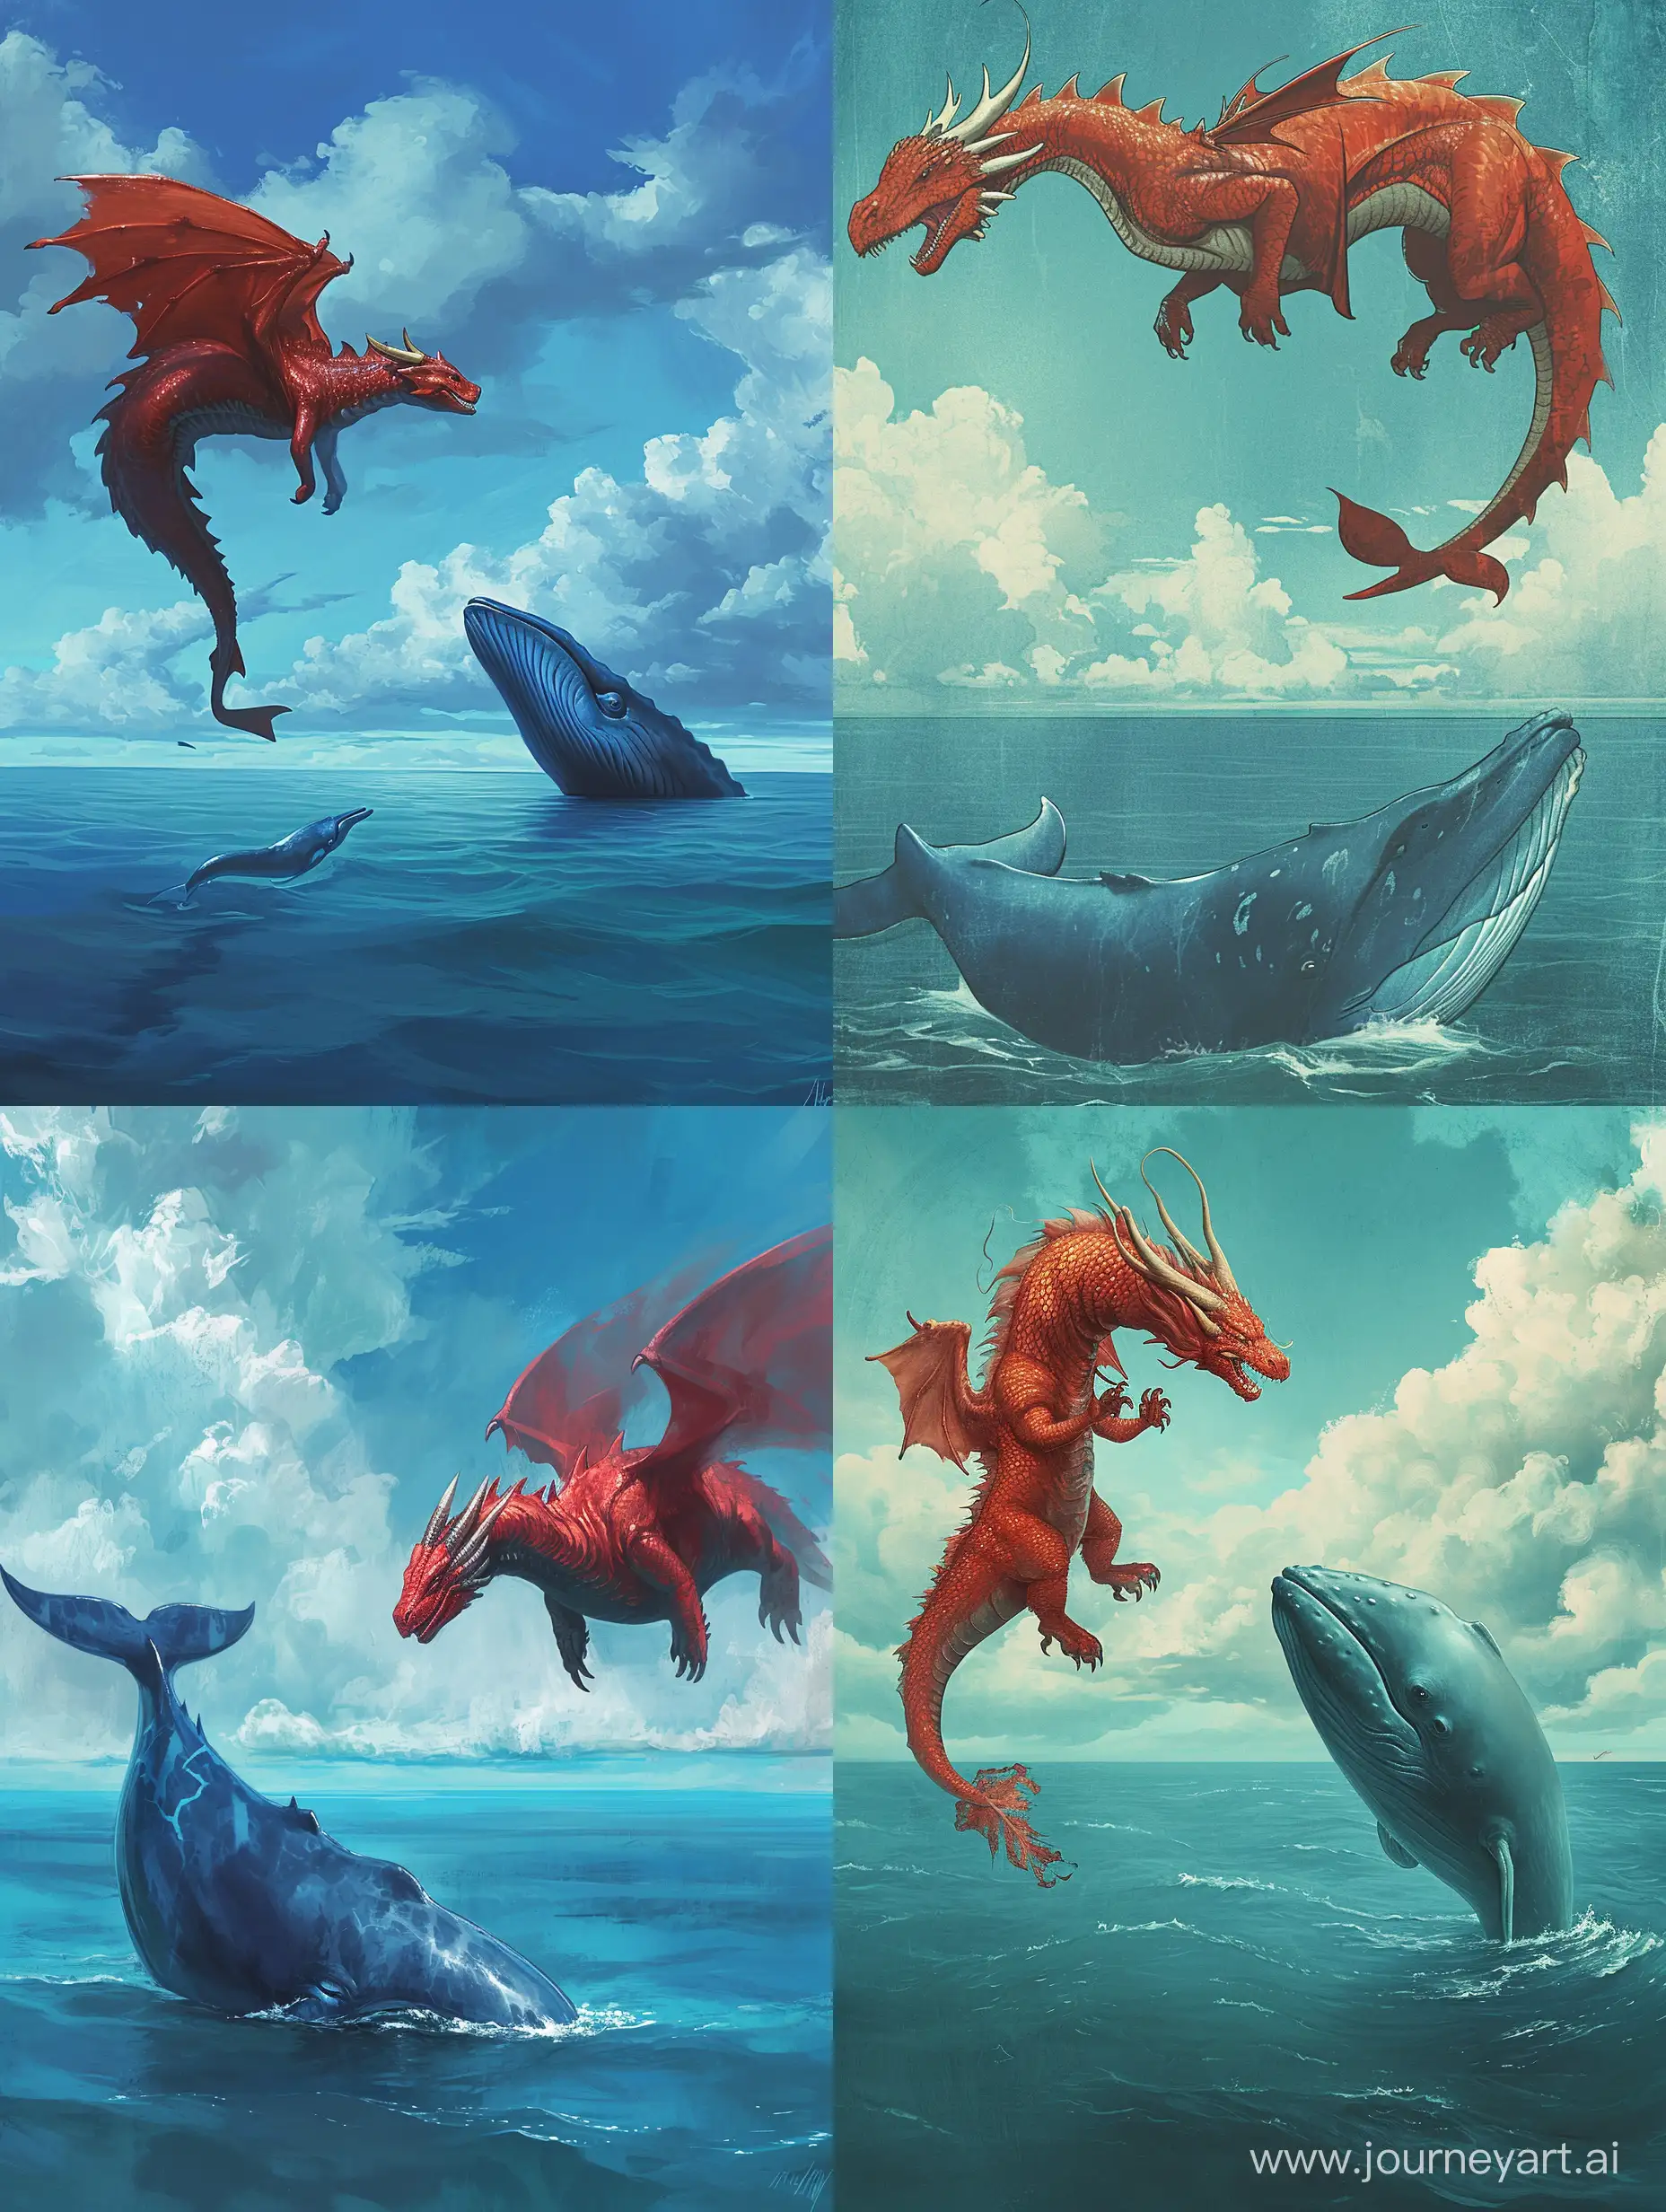 Majestic-Red-Dragon-Conversing-with-Blue-Whale-in-Azure-Sky-and-Ocean